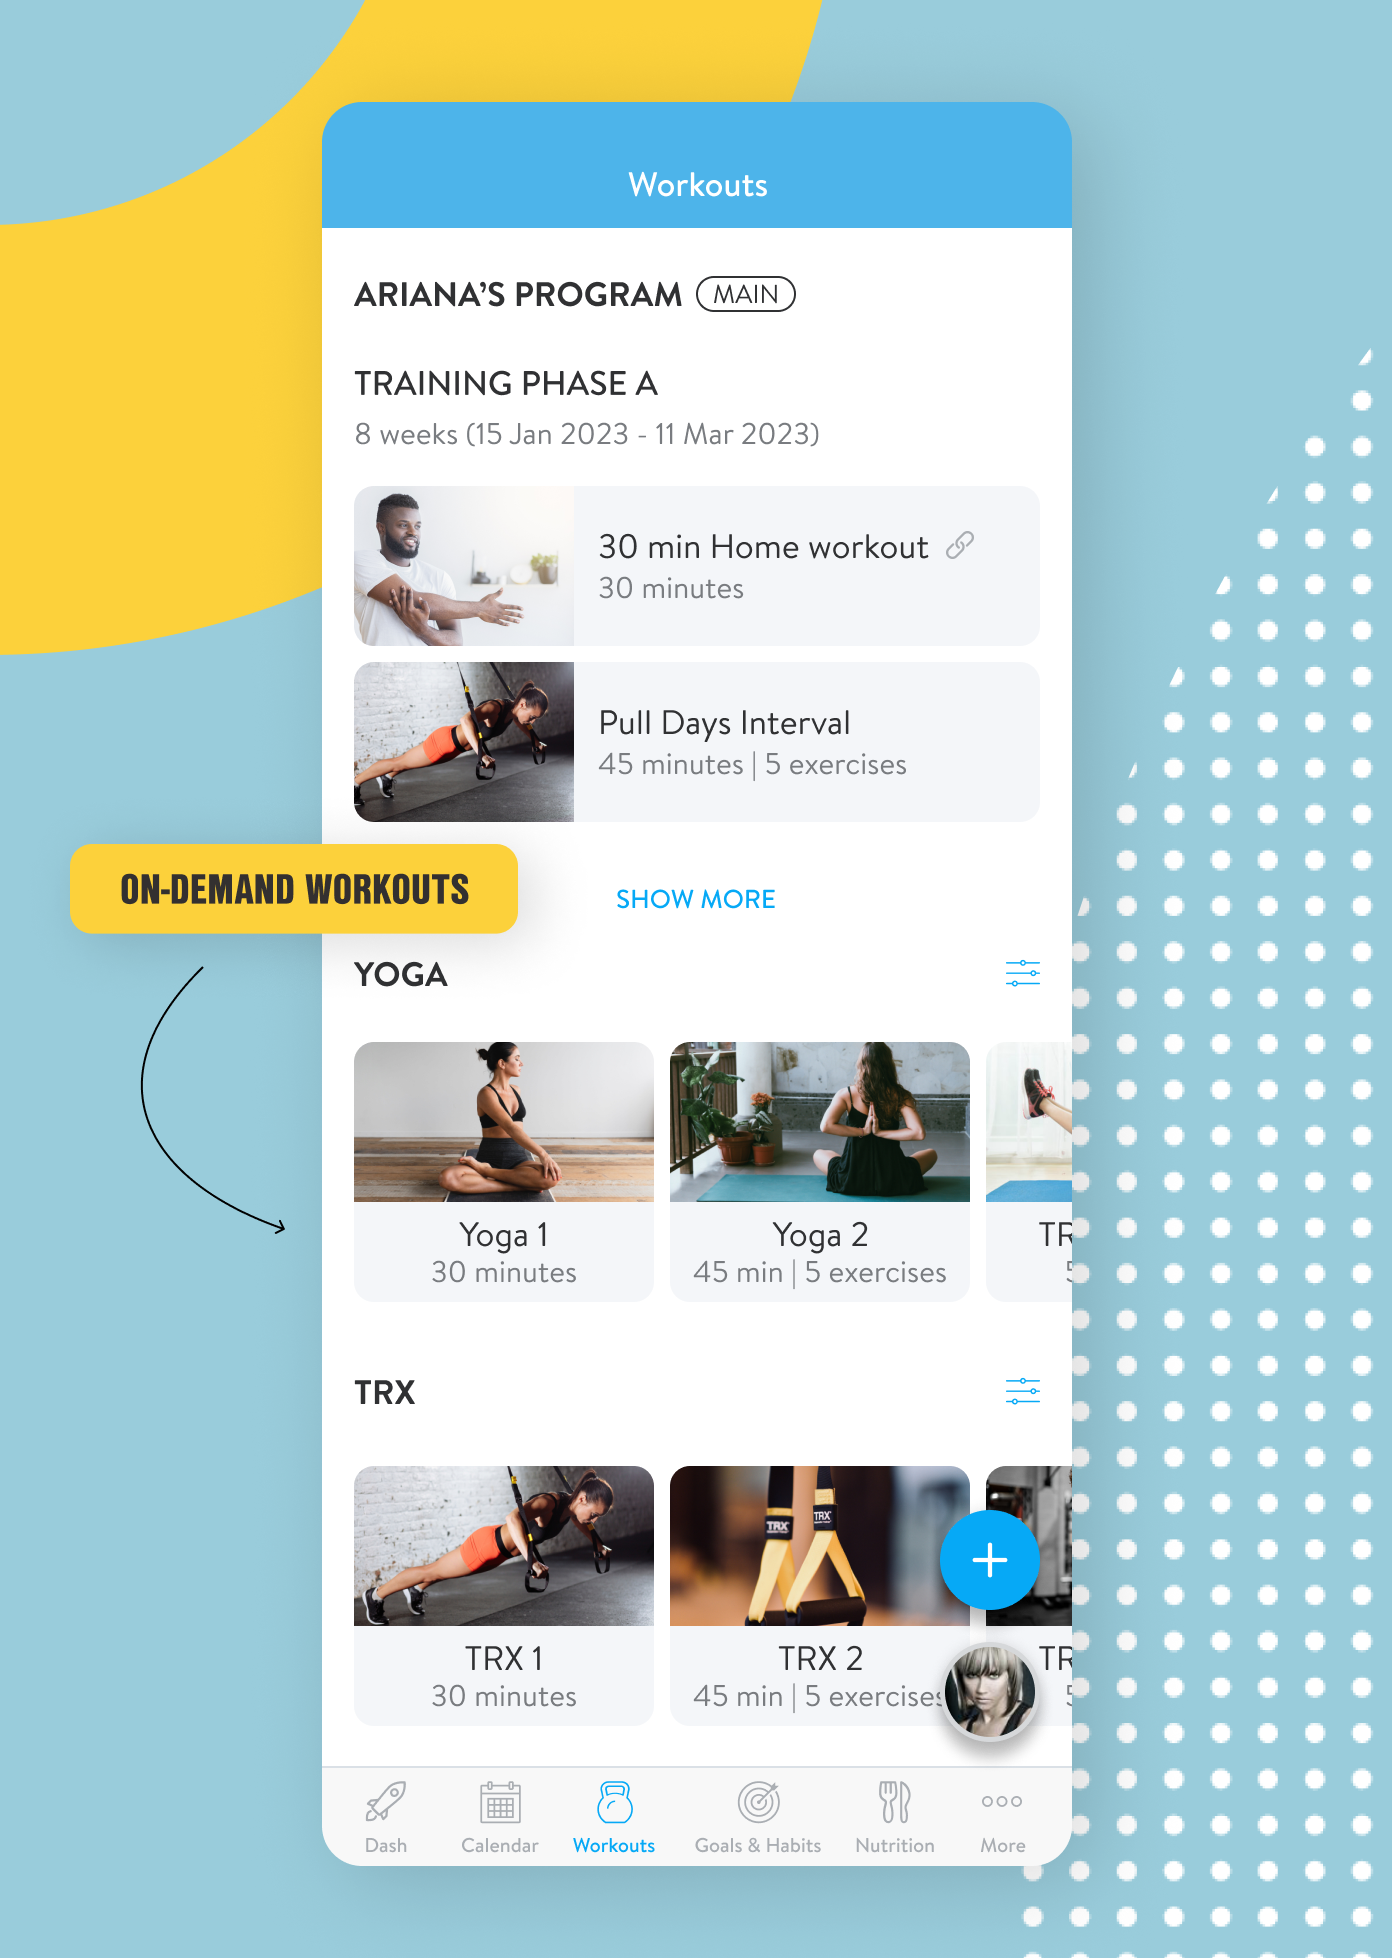 Deliver your workouts on-demand